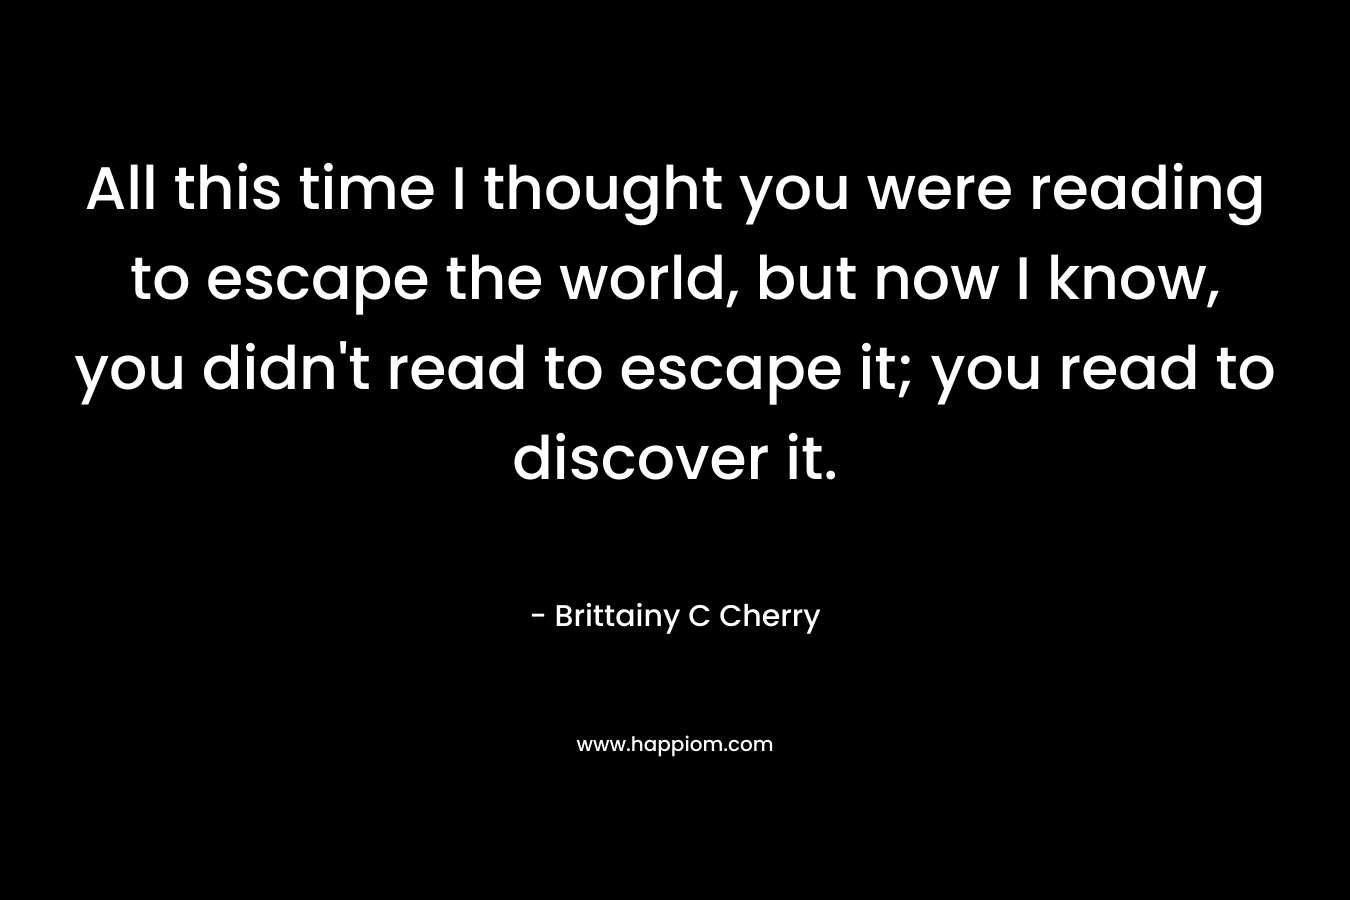 All this time I thought you were reading to escape the world, but now I know, you didn't read to escape it; you read to discover it.